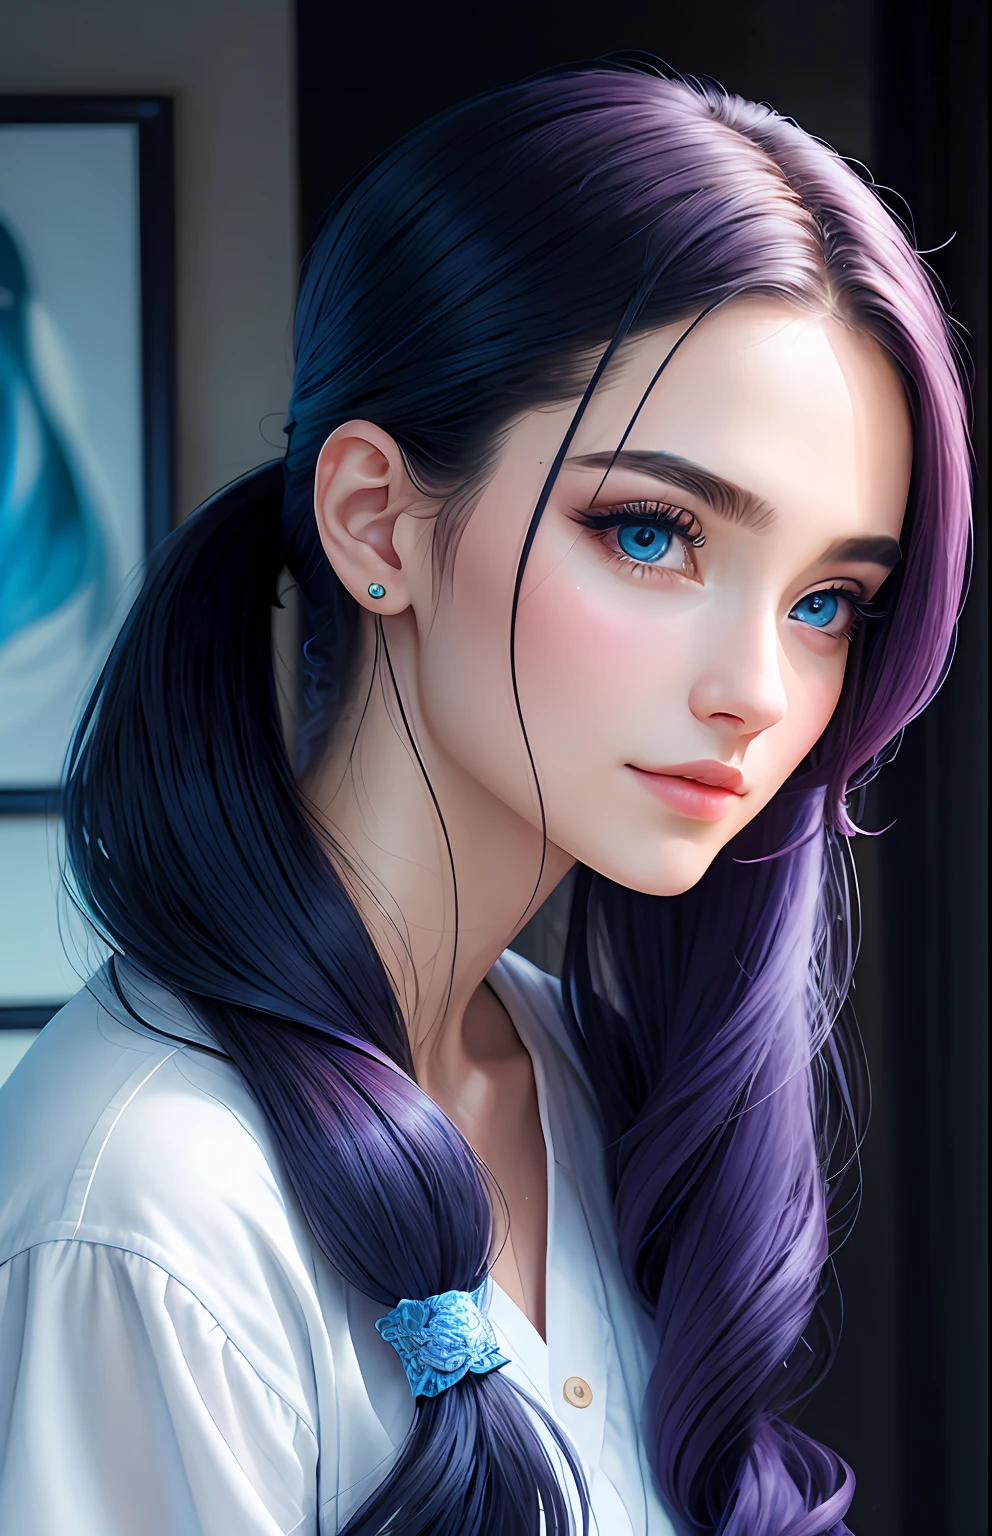 animesque、portraitures、One Person２３Pretty woman of year old、Moisturized eyes、Casual clothing、a picture、androgynous hunnuman、oval jaw、Delicate features、beautiful countenance、The hair、long pony tail、Blue eyes with a beautiful glow、LDS Art